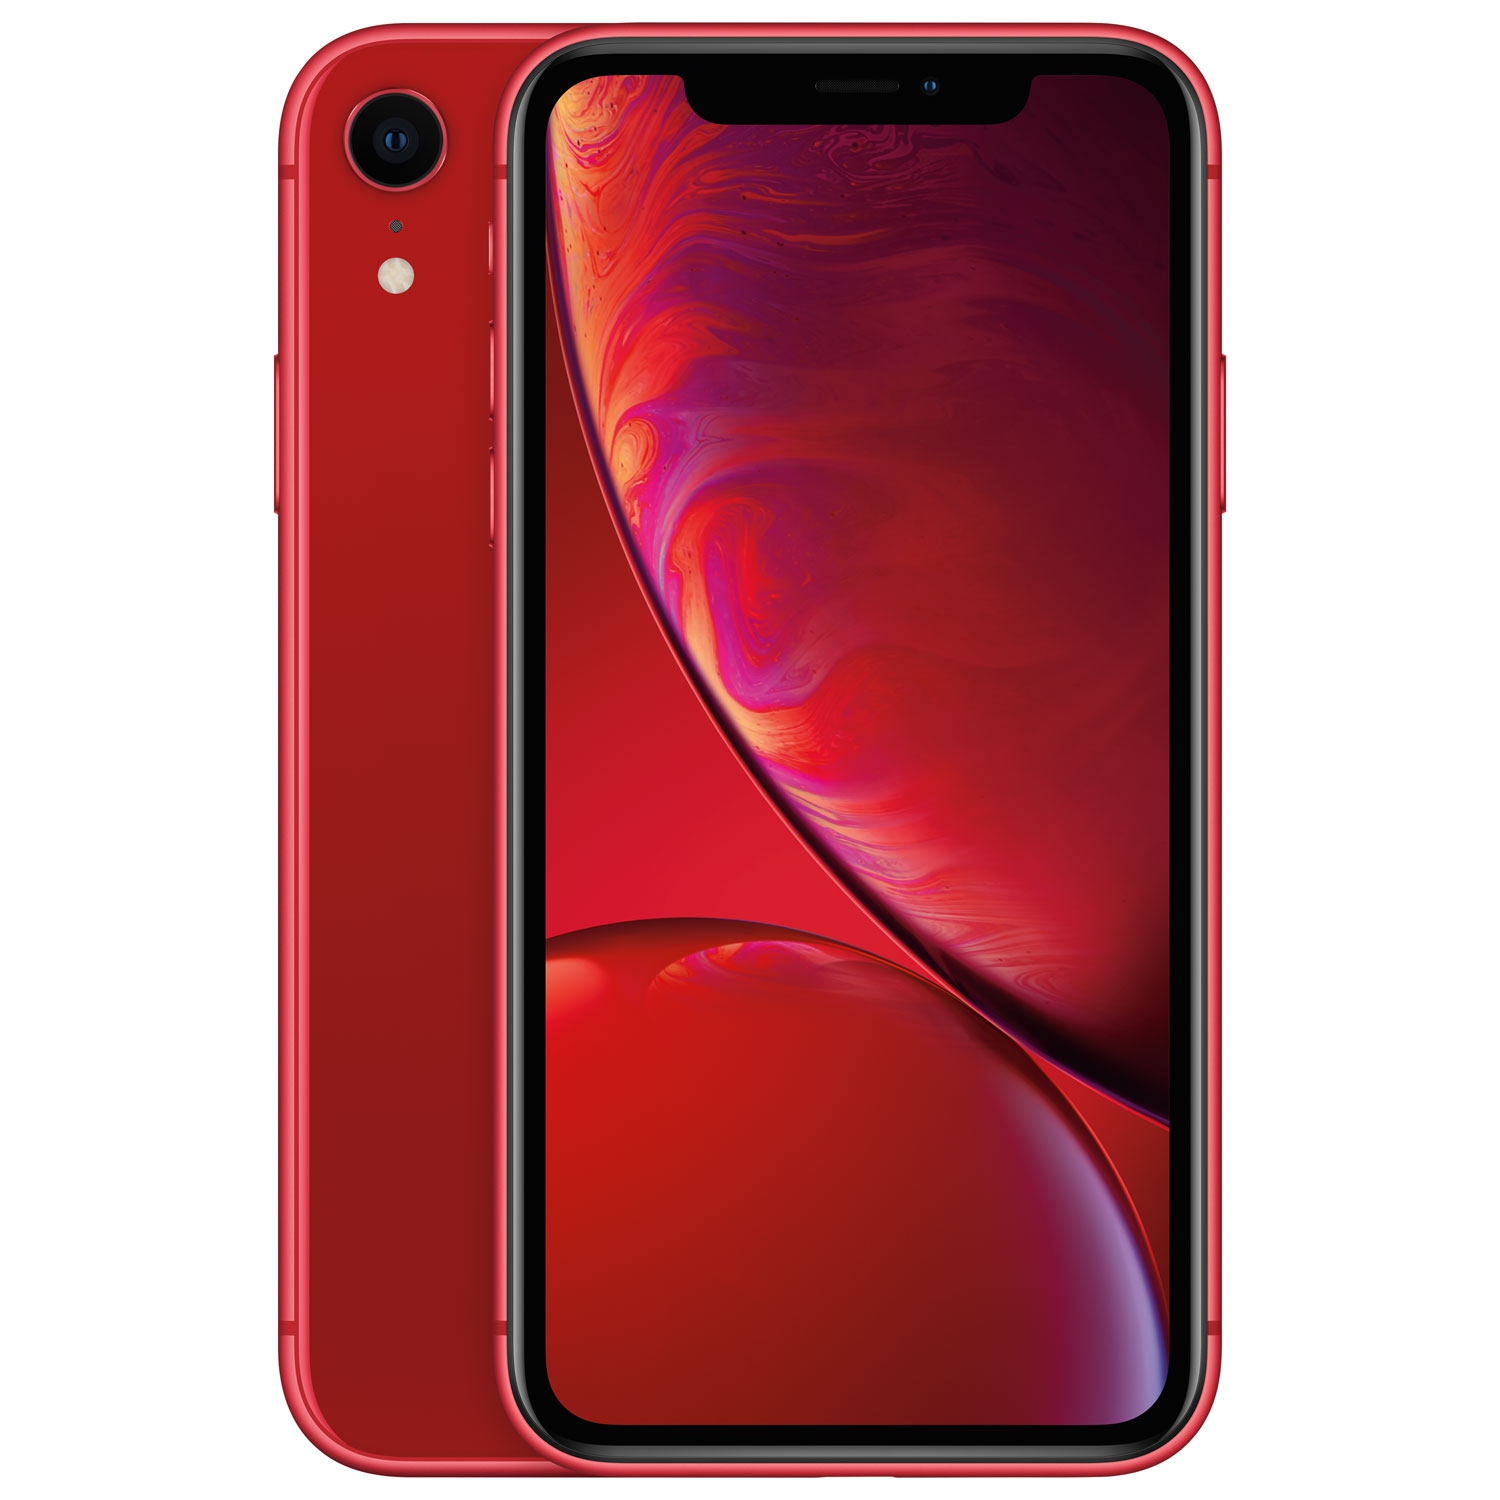 Refurbished (Excellent) - Apple iPhone XR 128GB Smartphone - (Product)RED - Unlocked - Certified Refurbished